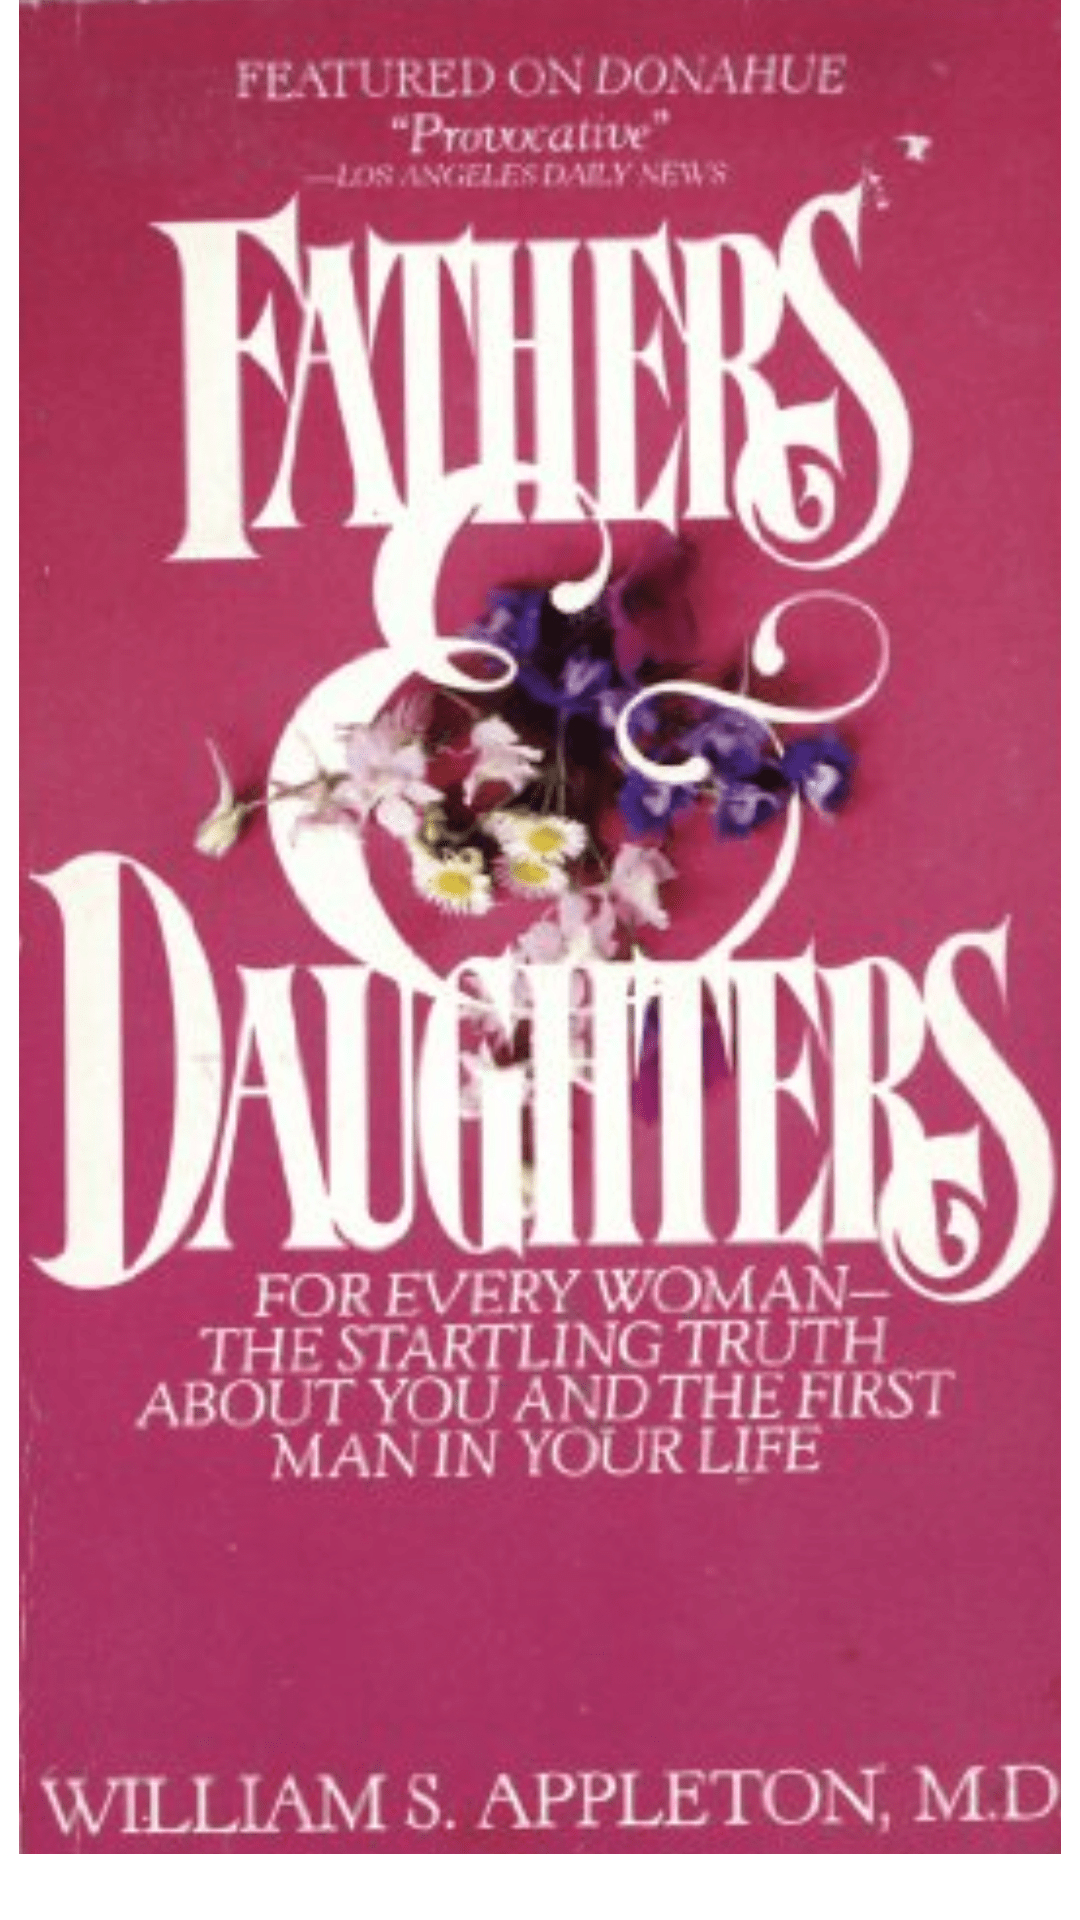 Fathers and Daughters by William S. Appleton